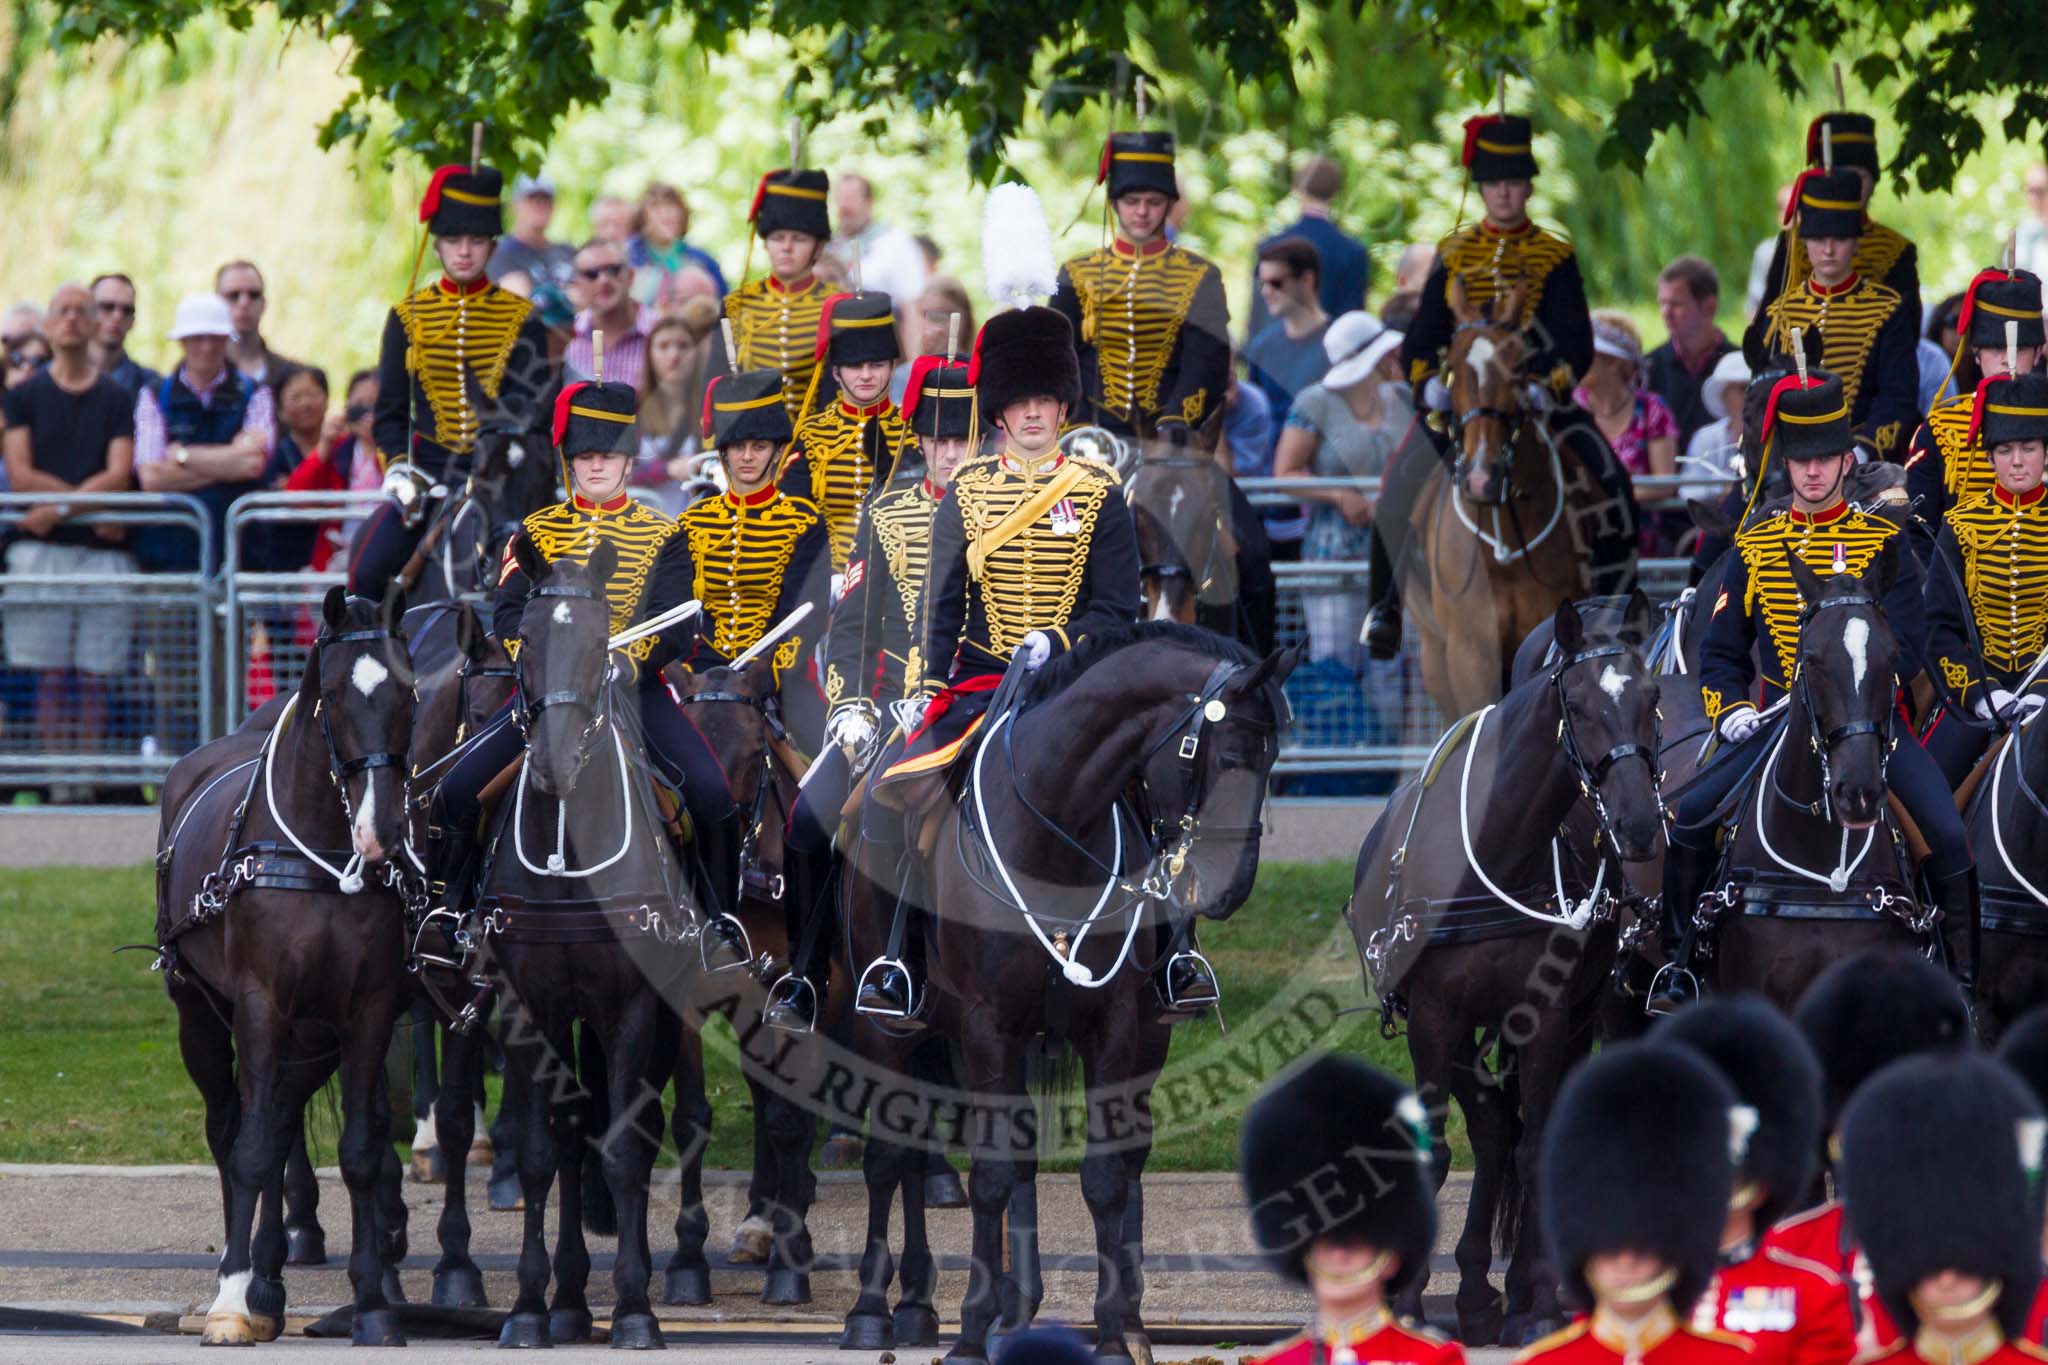 The Colonel's Review 2015.
Horse Guards Parade, Westminster,
London,

United Kingdom,
on 06 June 2015 at 11:24, image #325